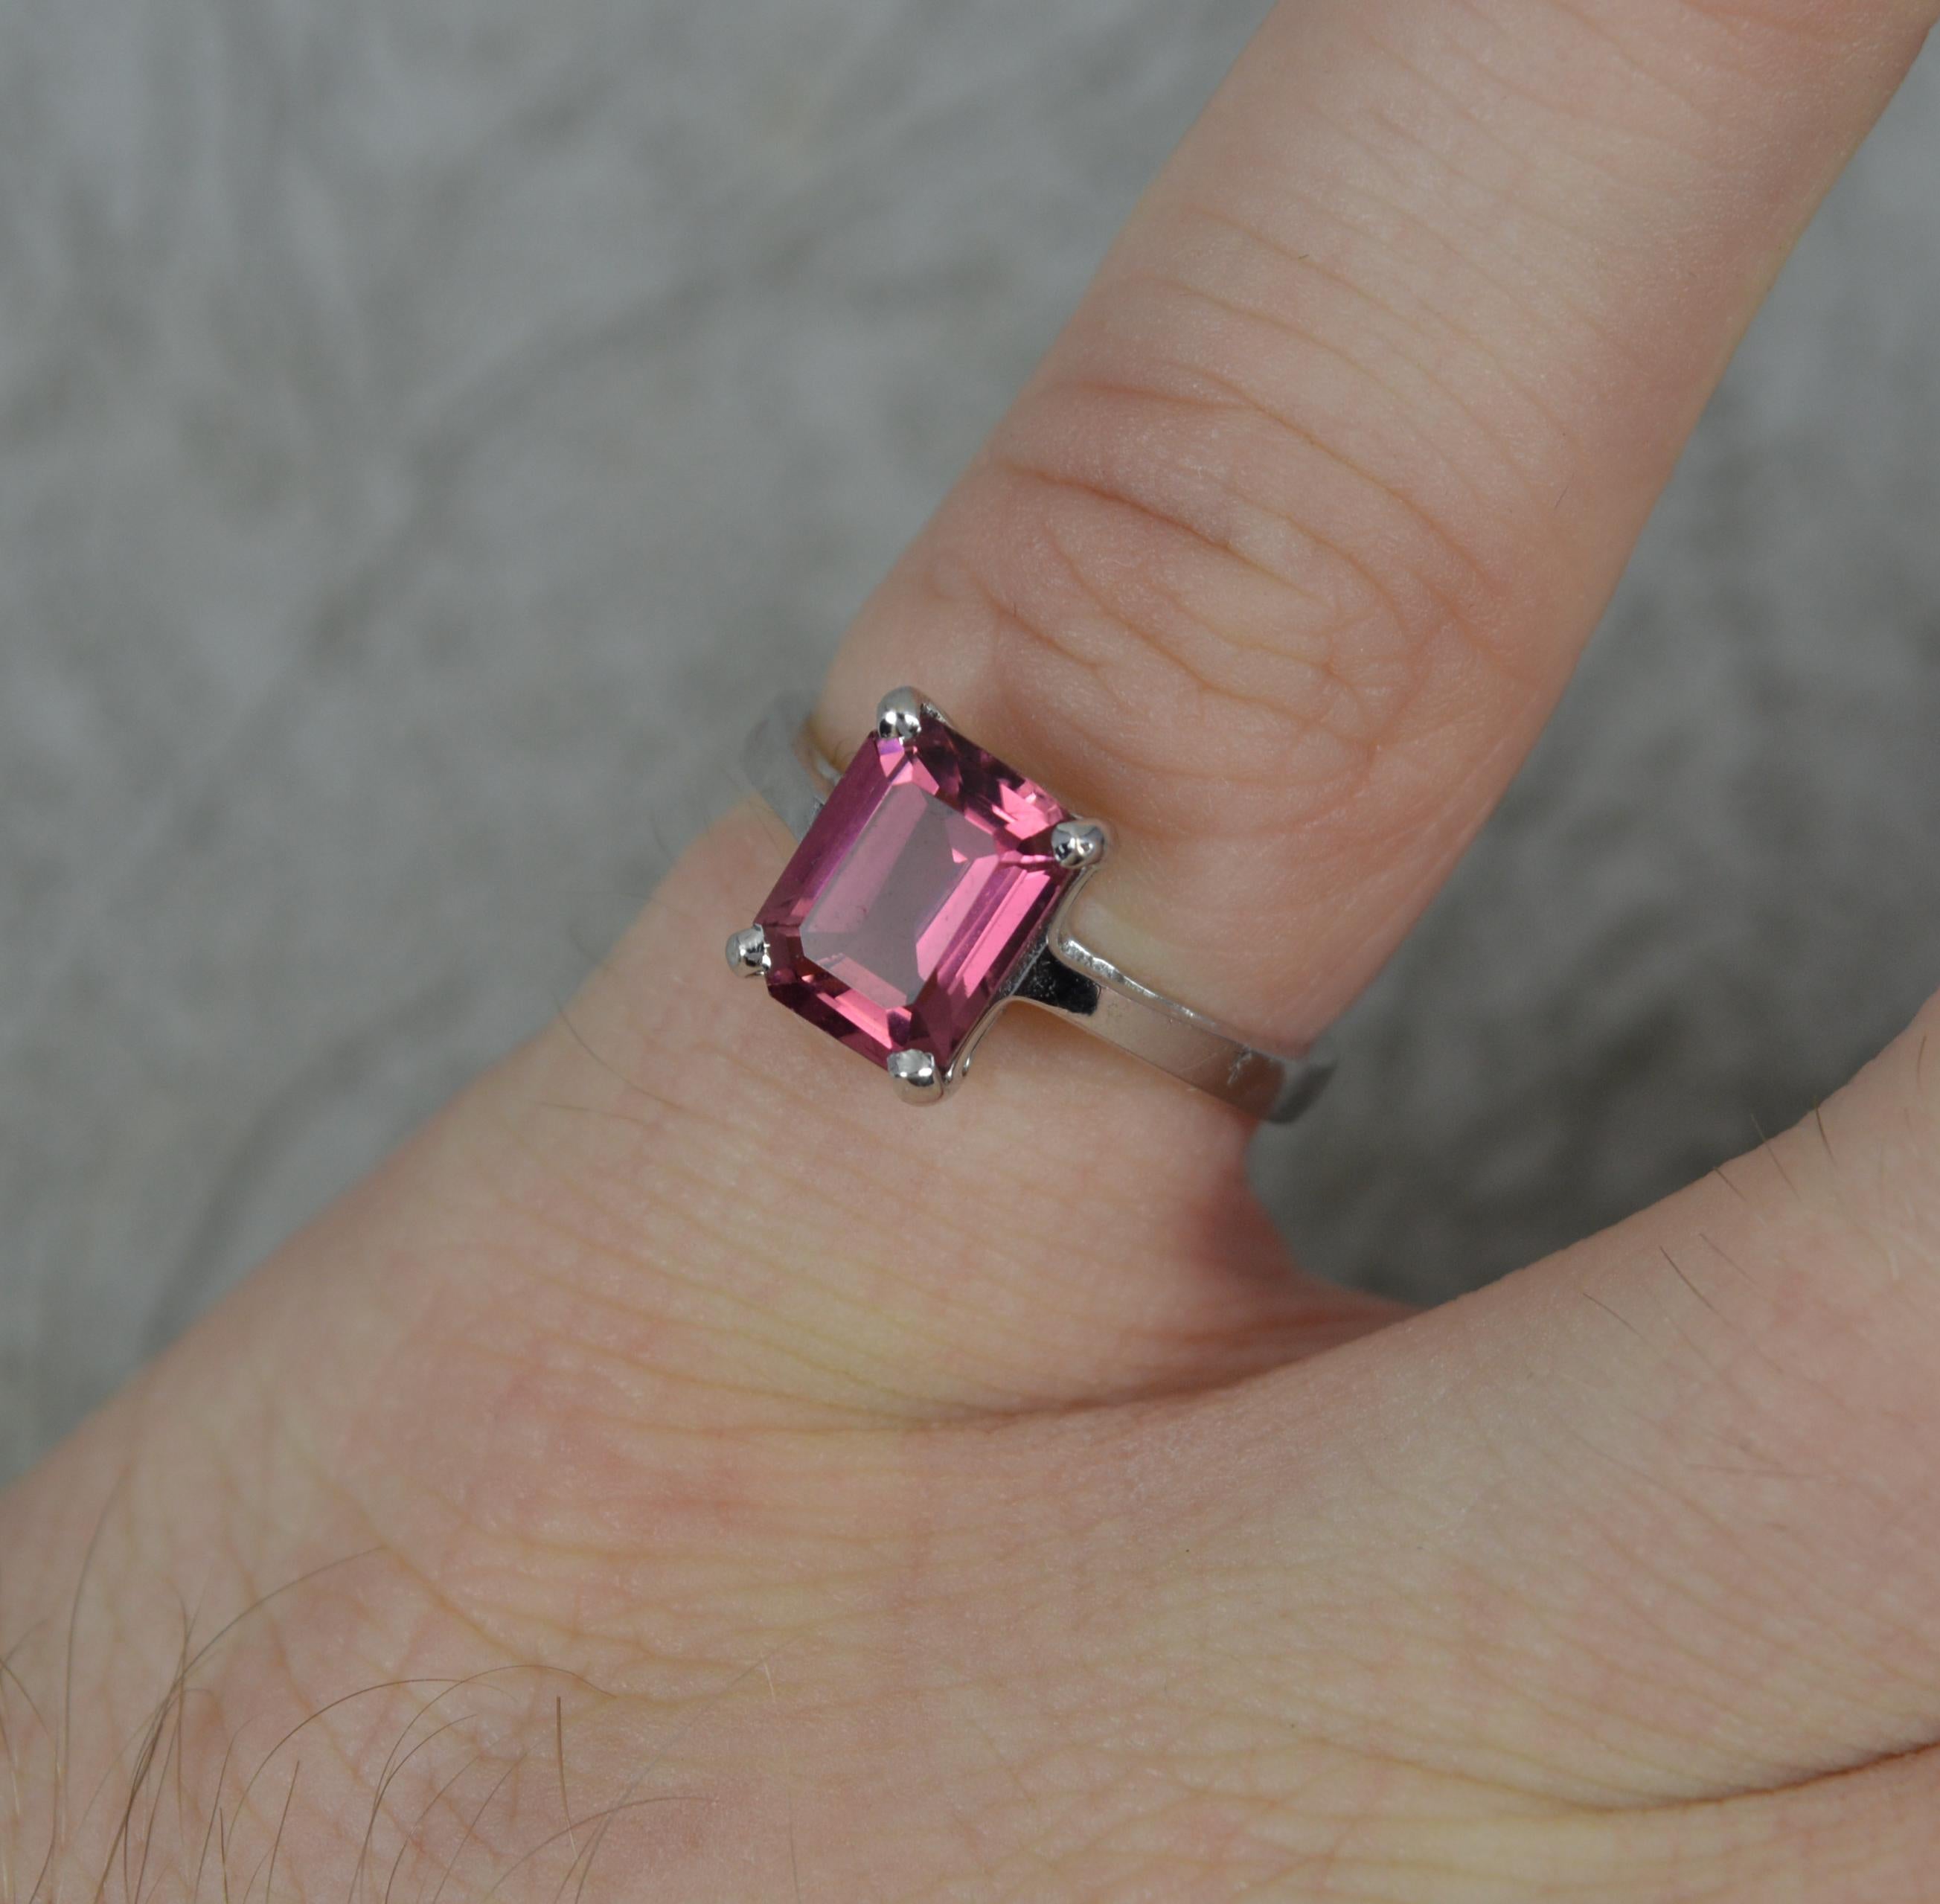 A superb Tourmaline solitaire ring.
Solid 18 carat white gold shank and setting.
Set with a single, emerald cut natural tourmaline. 6mm x 8mm, 1.75 carats. Wonderful colour.

CONDITION ; Very good. Crisp design. Well set, clean stone. Issue free.